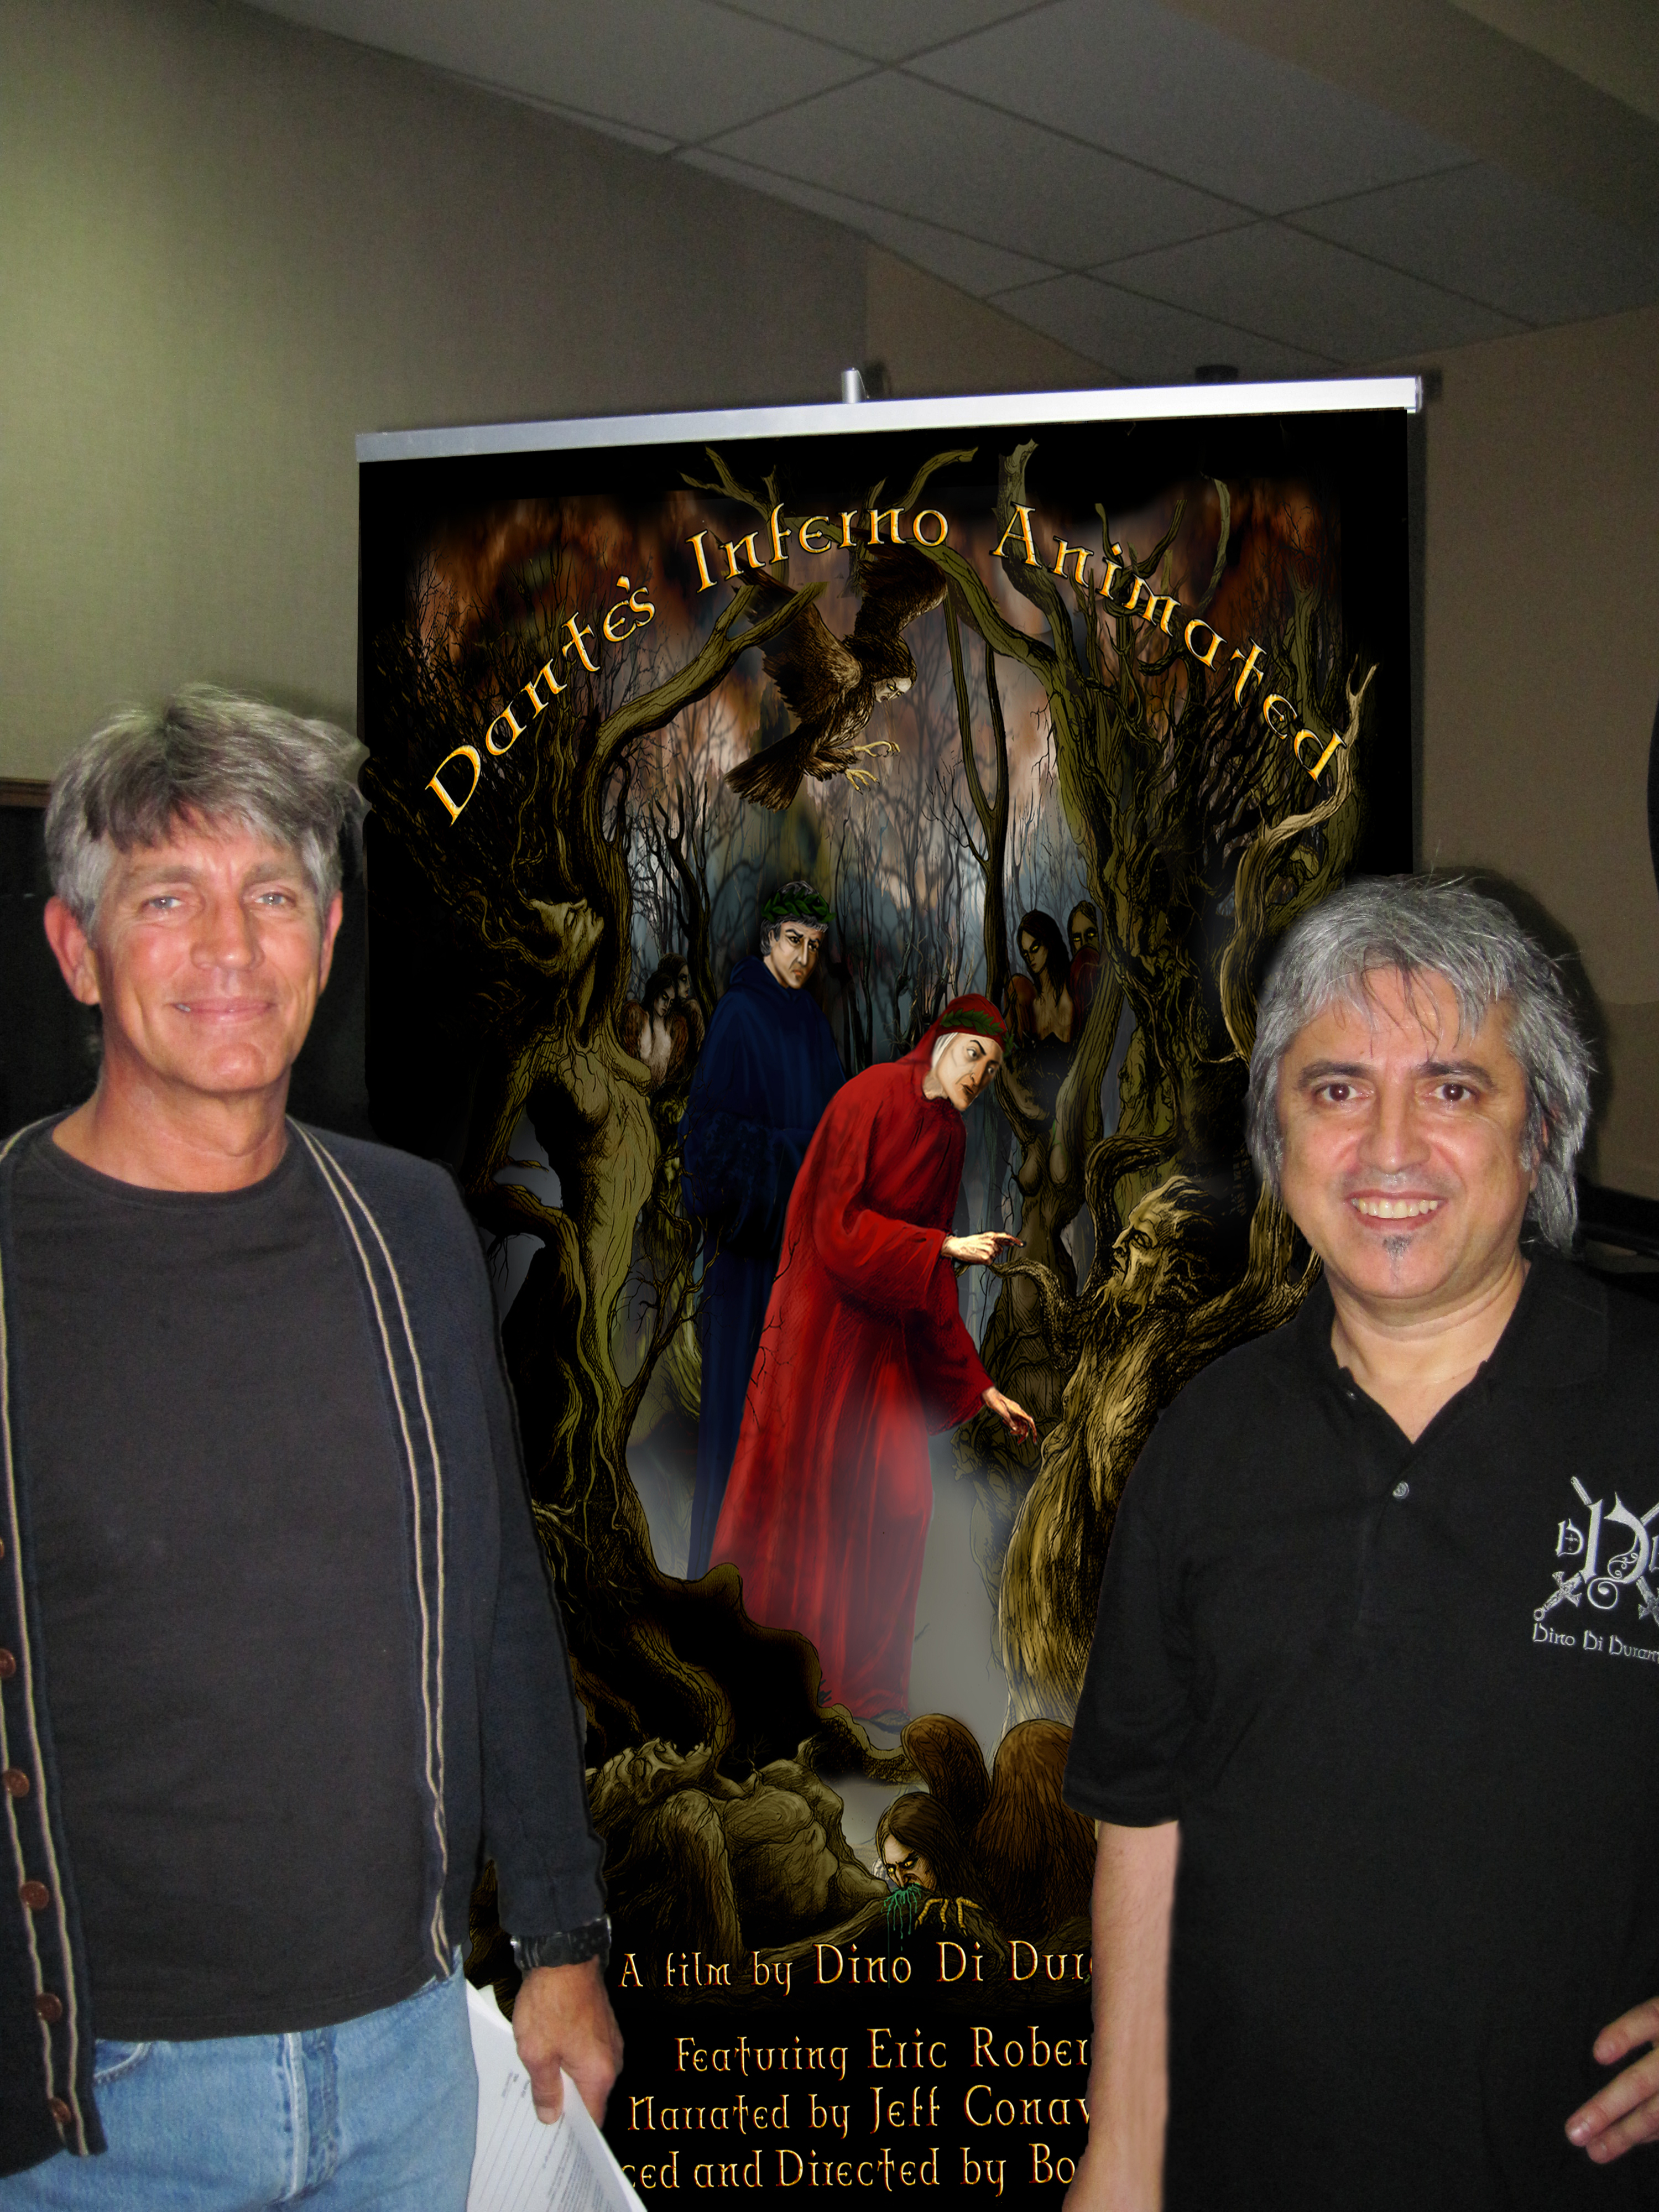 Boris Acosta and Eric Roberts during audio recording session of Dante's Inferno in April 2010.